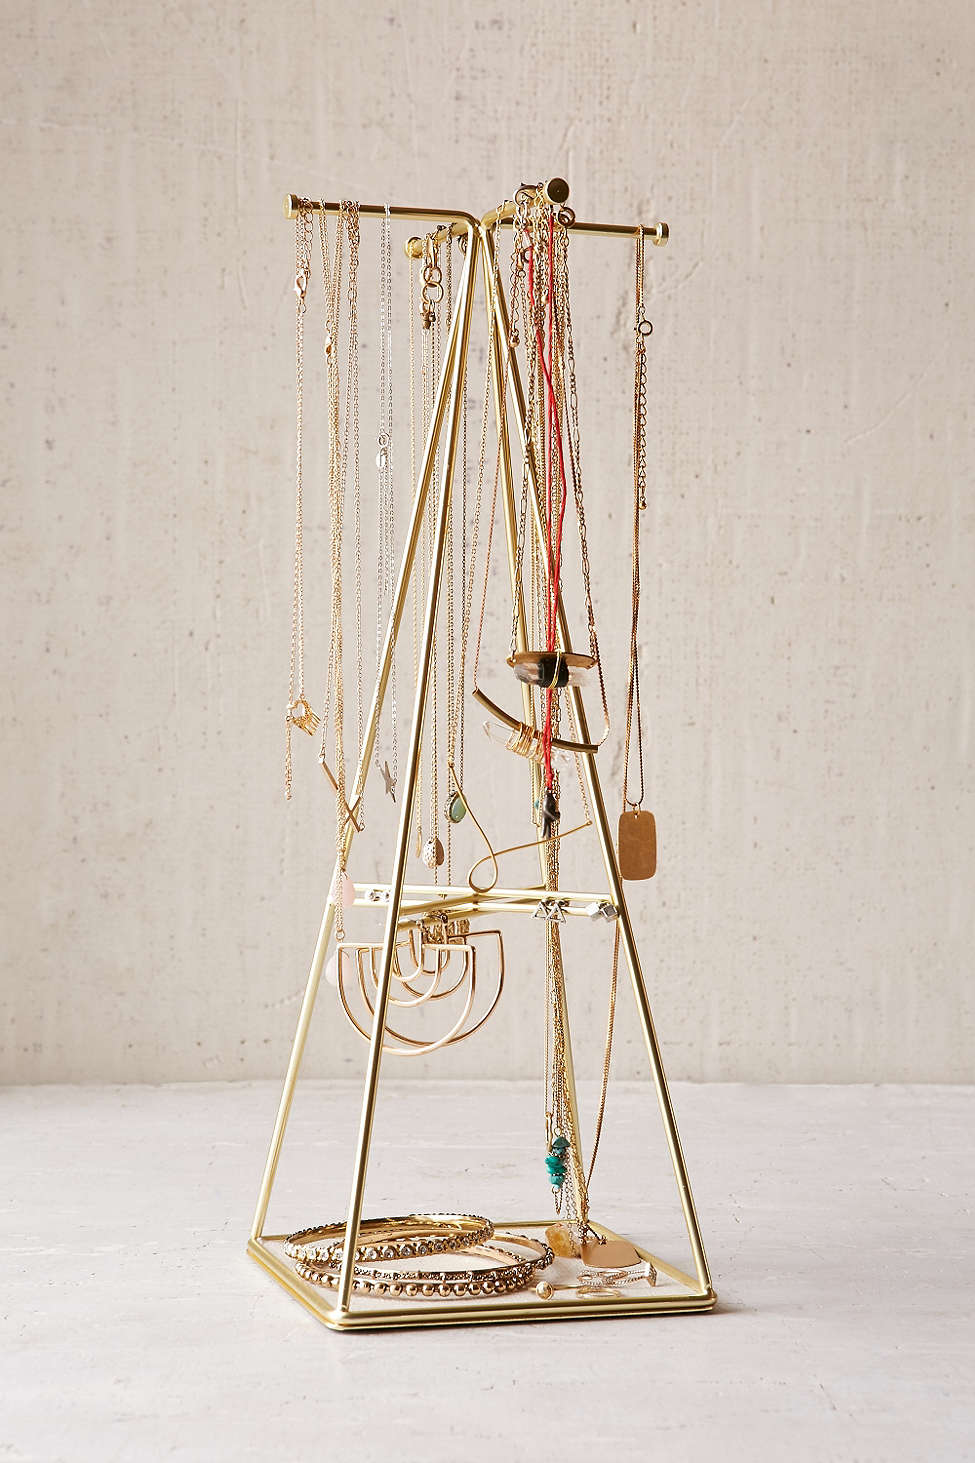 A brass-plated linen-lined Umbra Prisma Large Jewelry Organizer from Urban Outfitters is a perfect Valentine's gift for her.